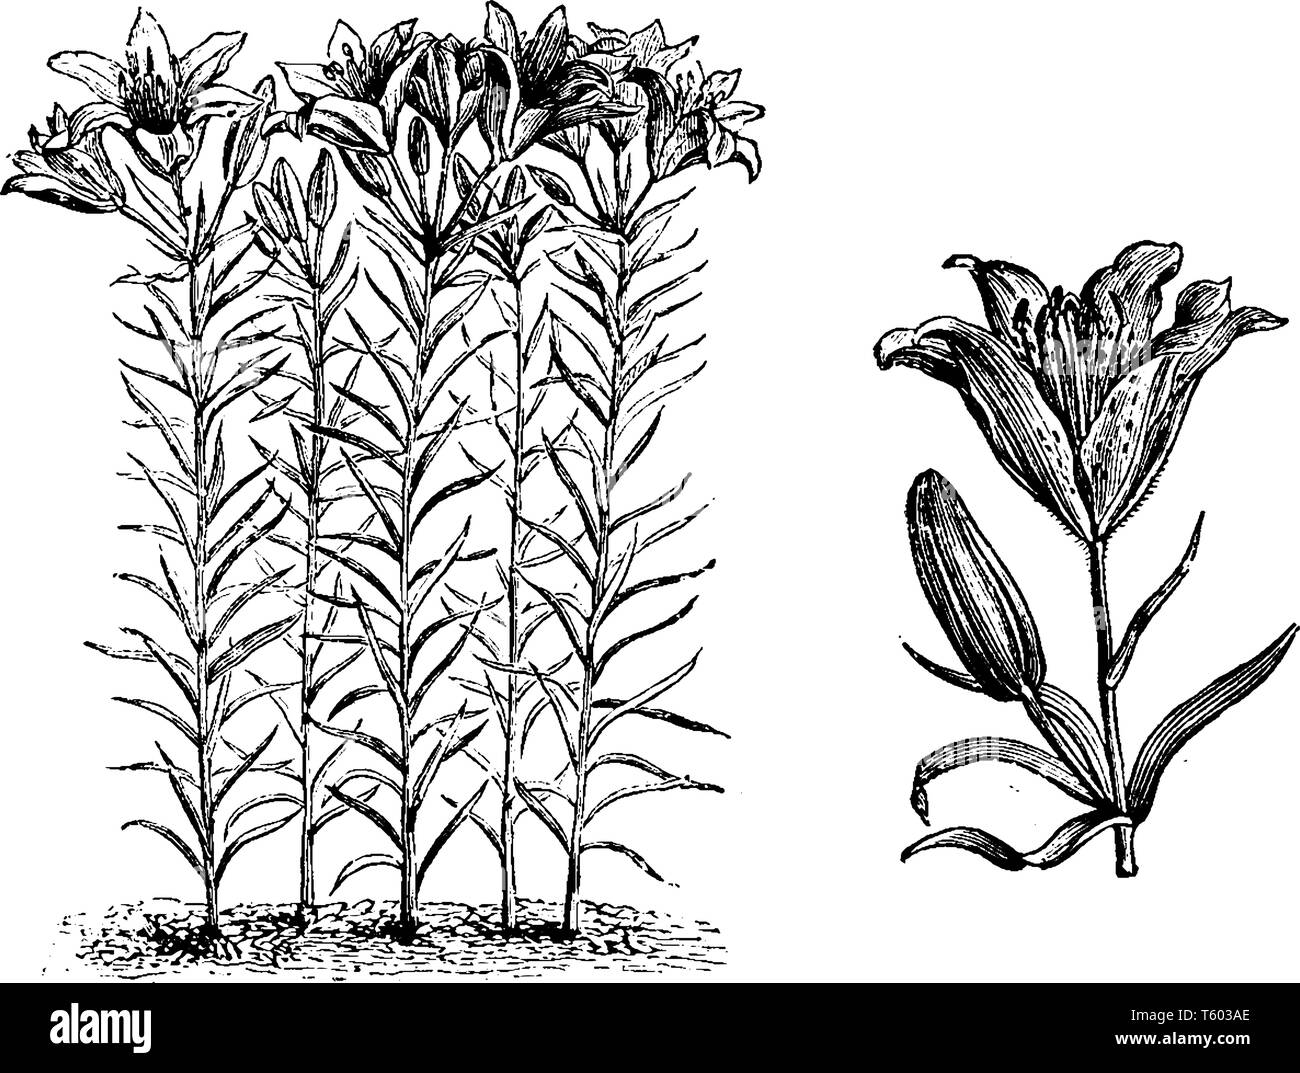 Lilium davuricum plant stem grows two and three feet high. Flowers are red in color, vintage line drawing or engraving illustration. Stock Vector